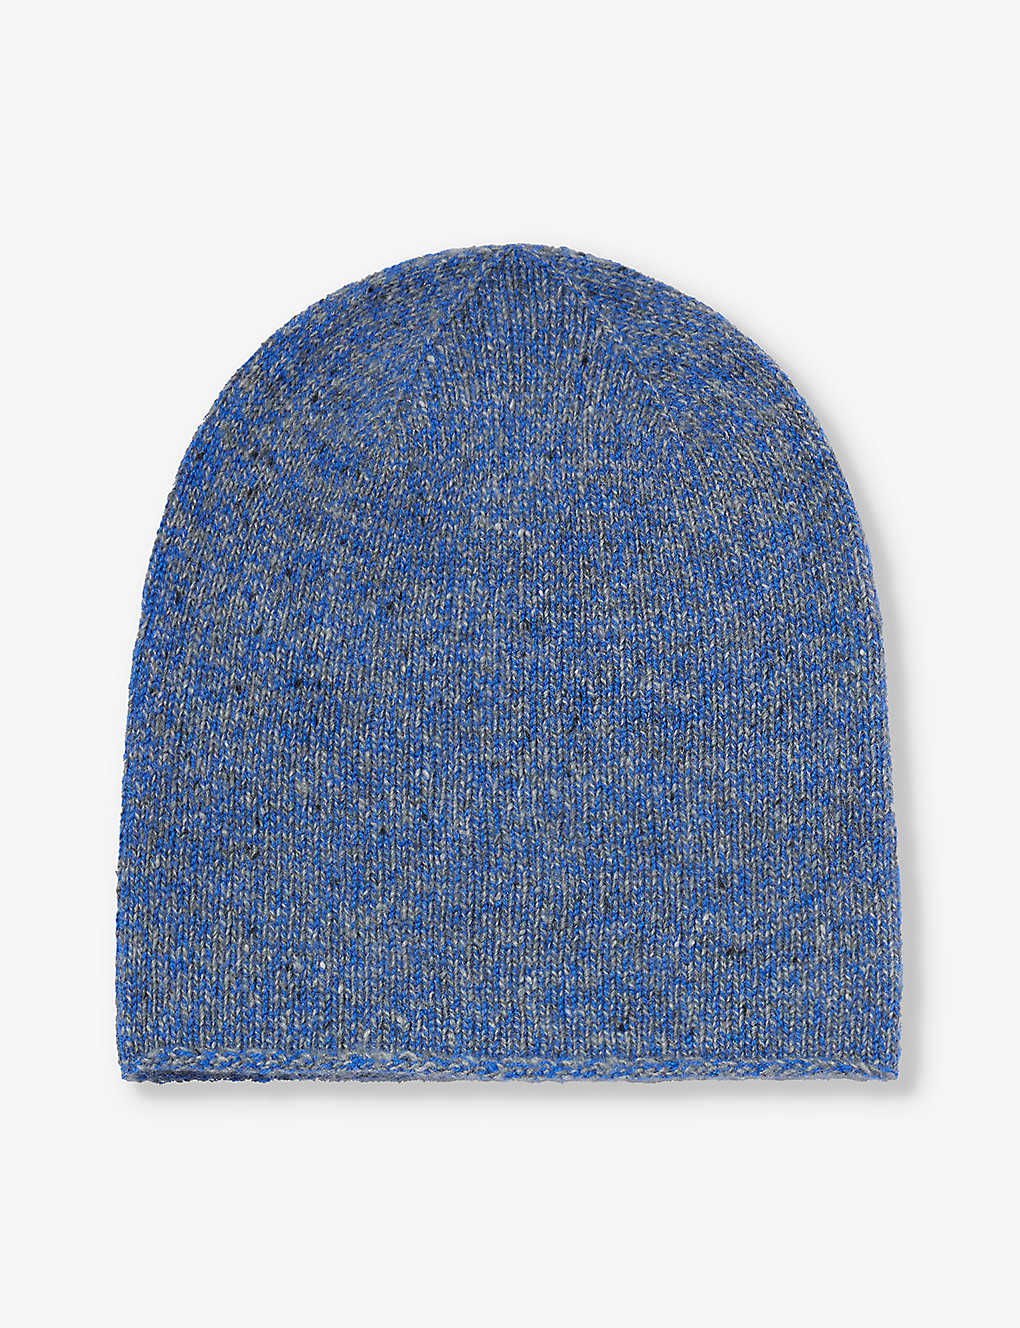 Johnstons Speckled Cashmere Beanie In Light Grey Don/blue Marl